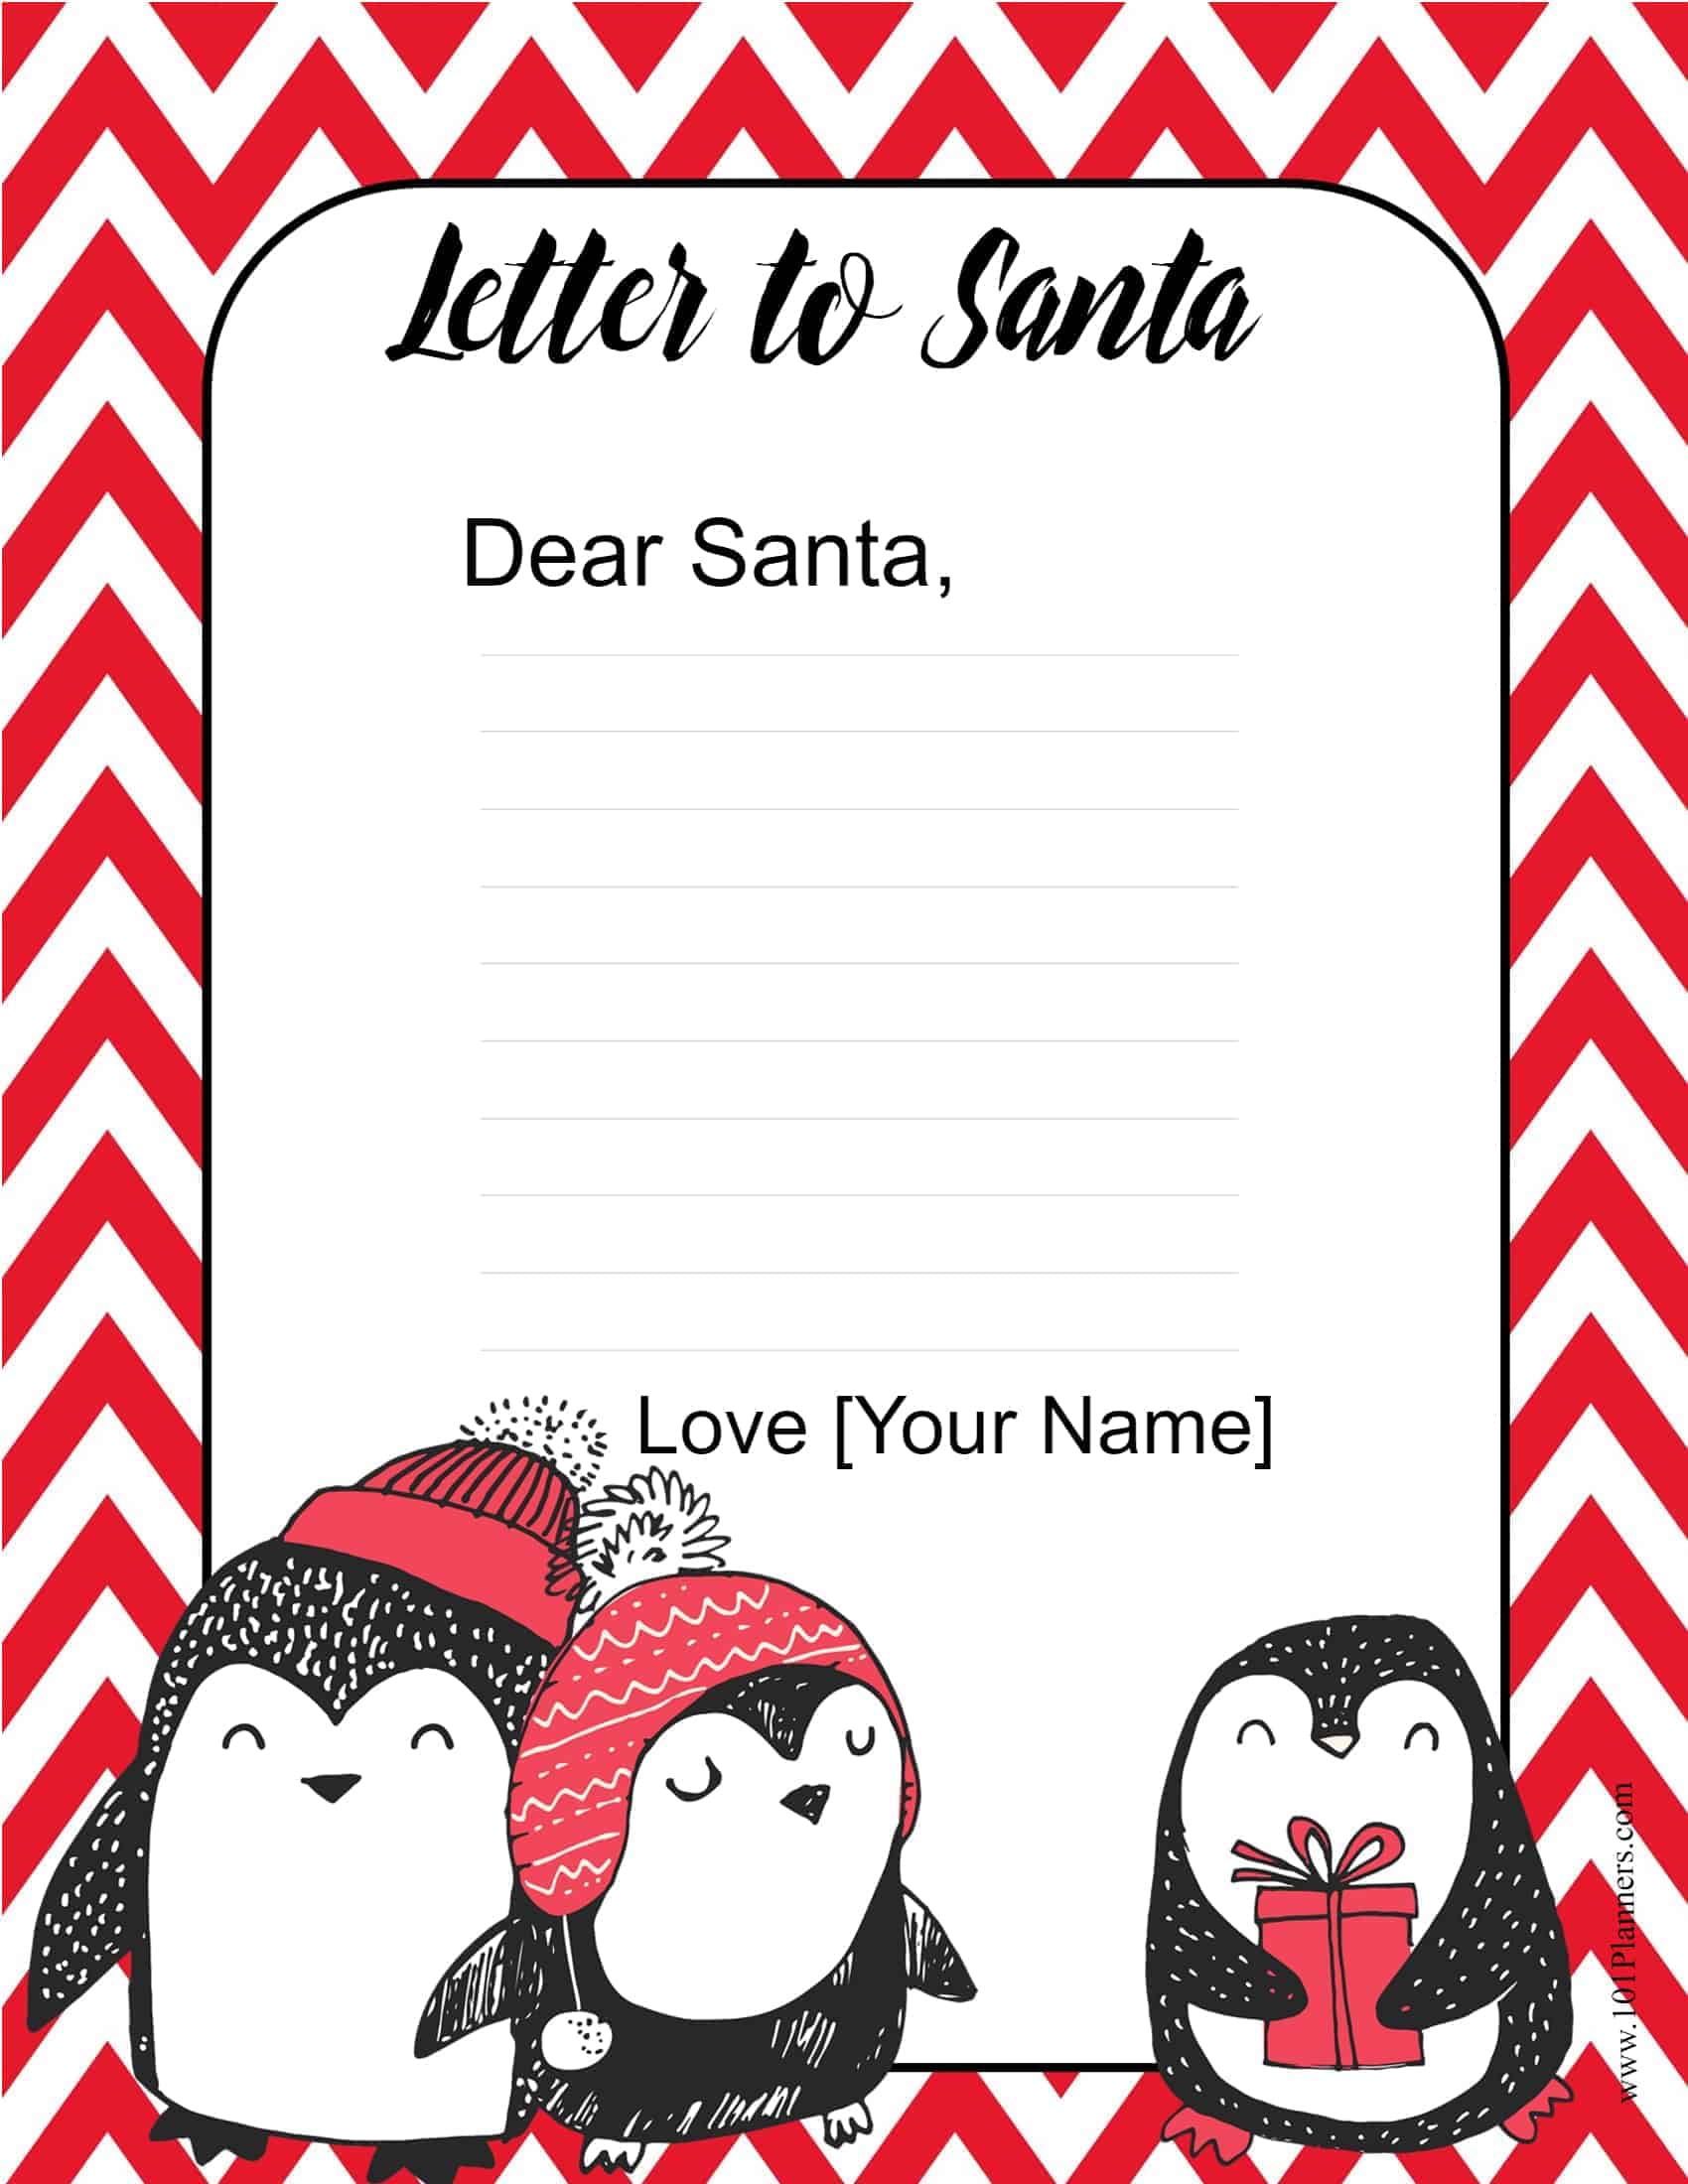 free-letter-to-santa-template-customize-online-then-print